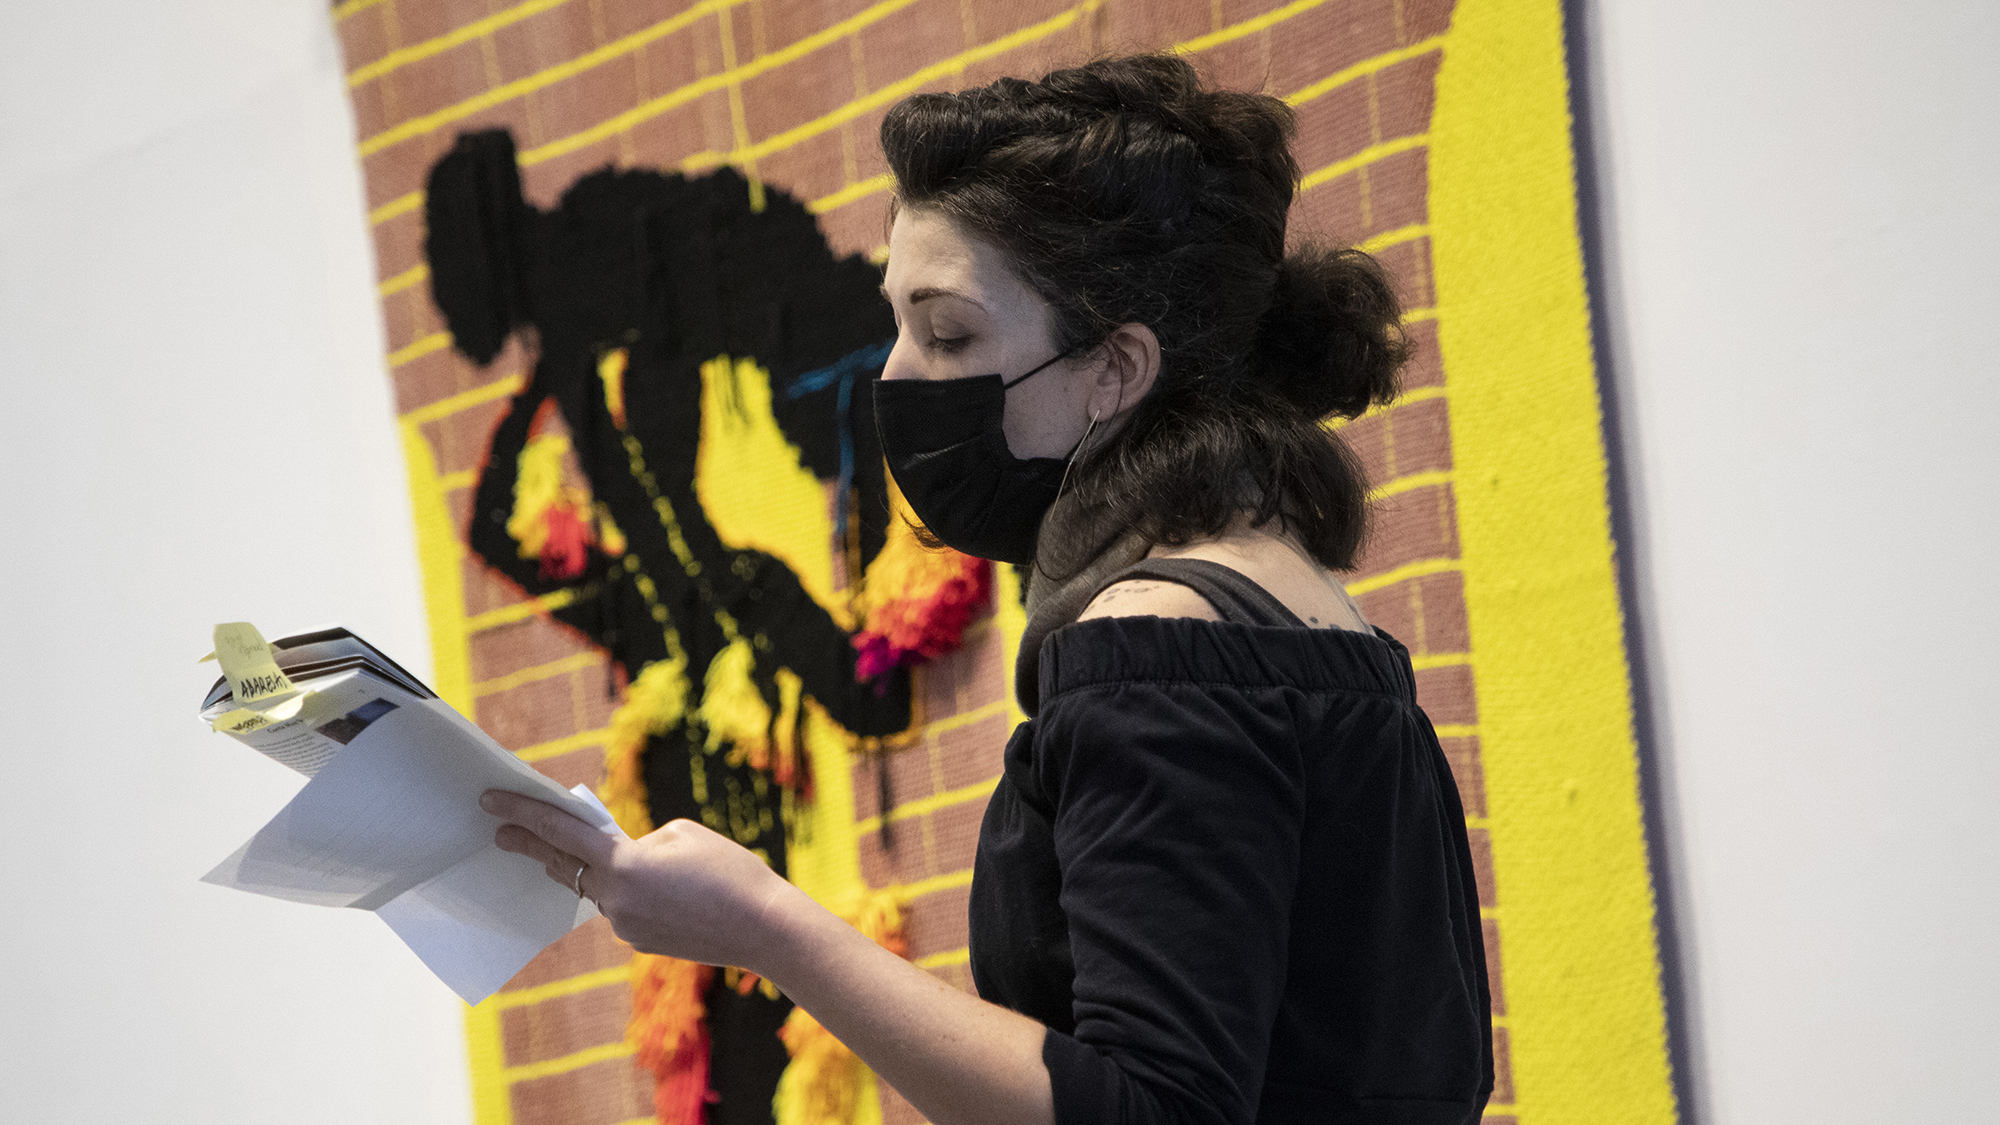 A person in a fabric mask reading from a catalog standing in front of a woven artwork.